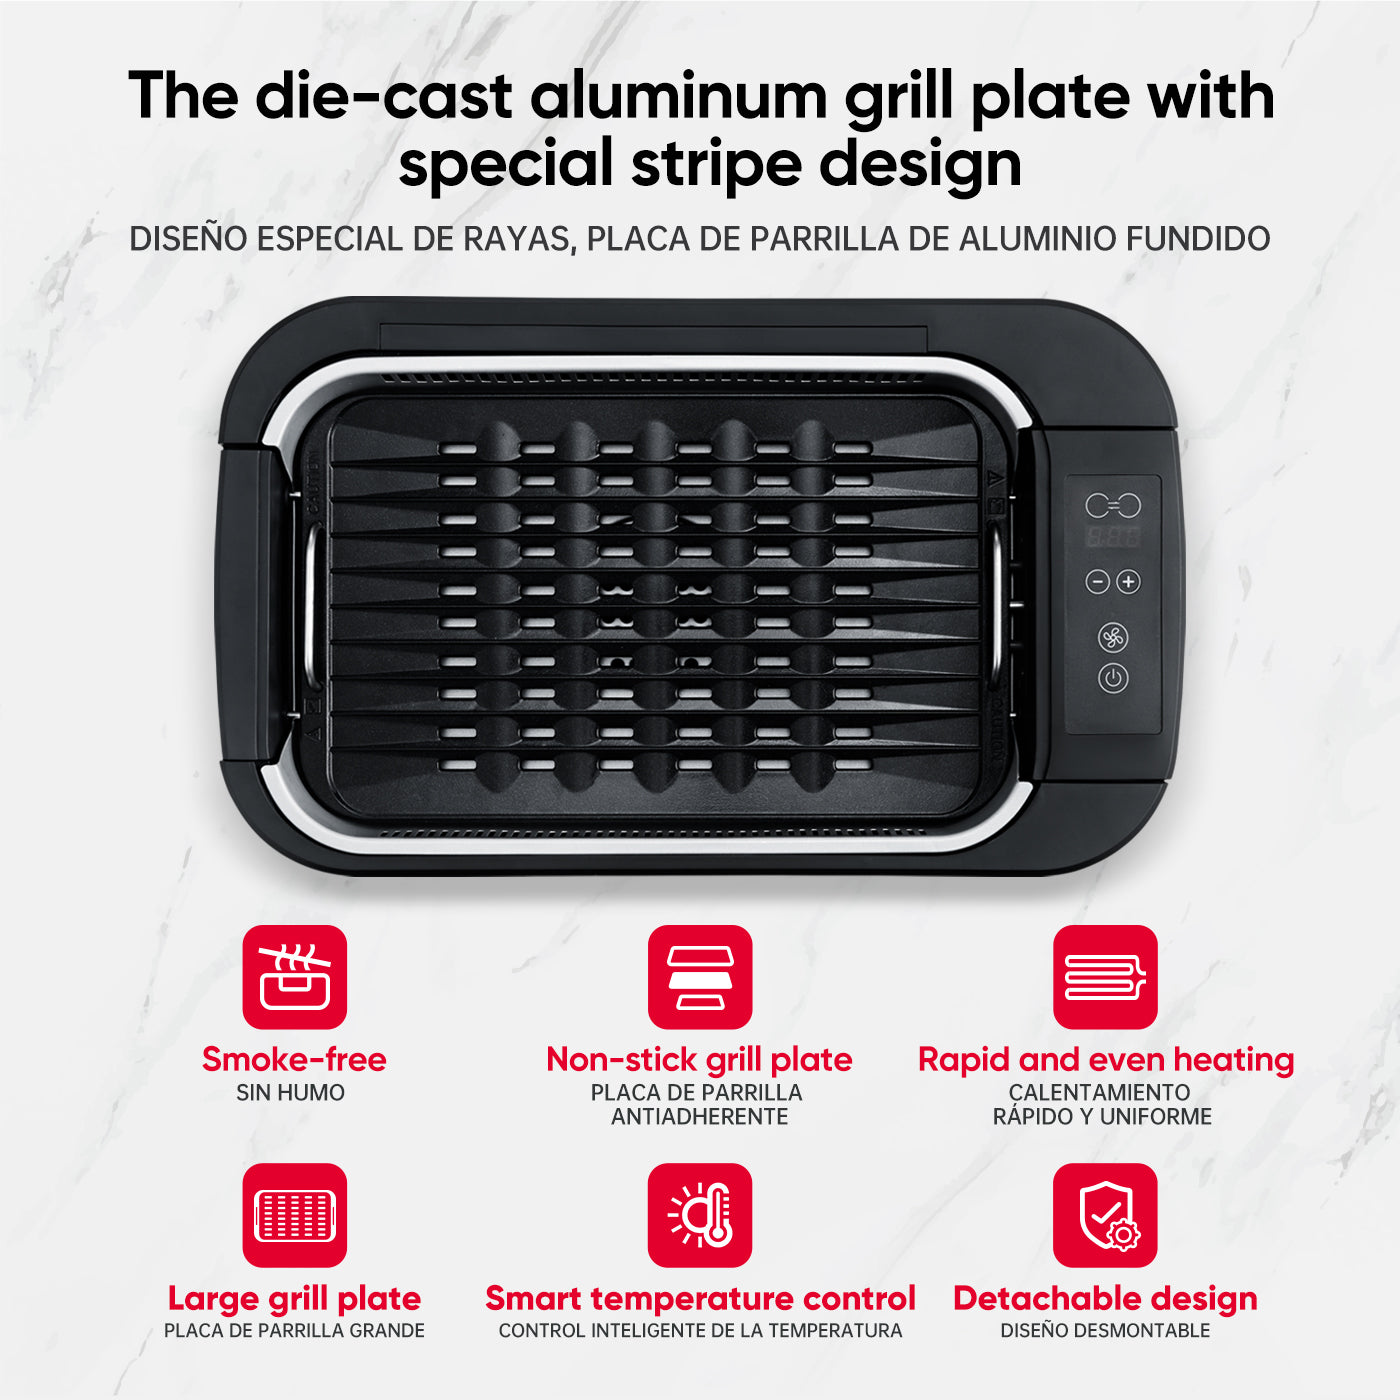 the die -cast aluminum grill plate with special stripe design smoke-free non-stick grill plate rapid and even heating large rrill plate smart temperature control detachable design